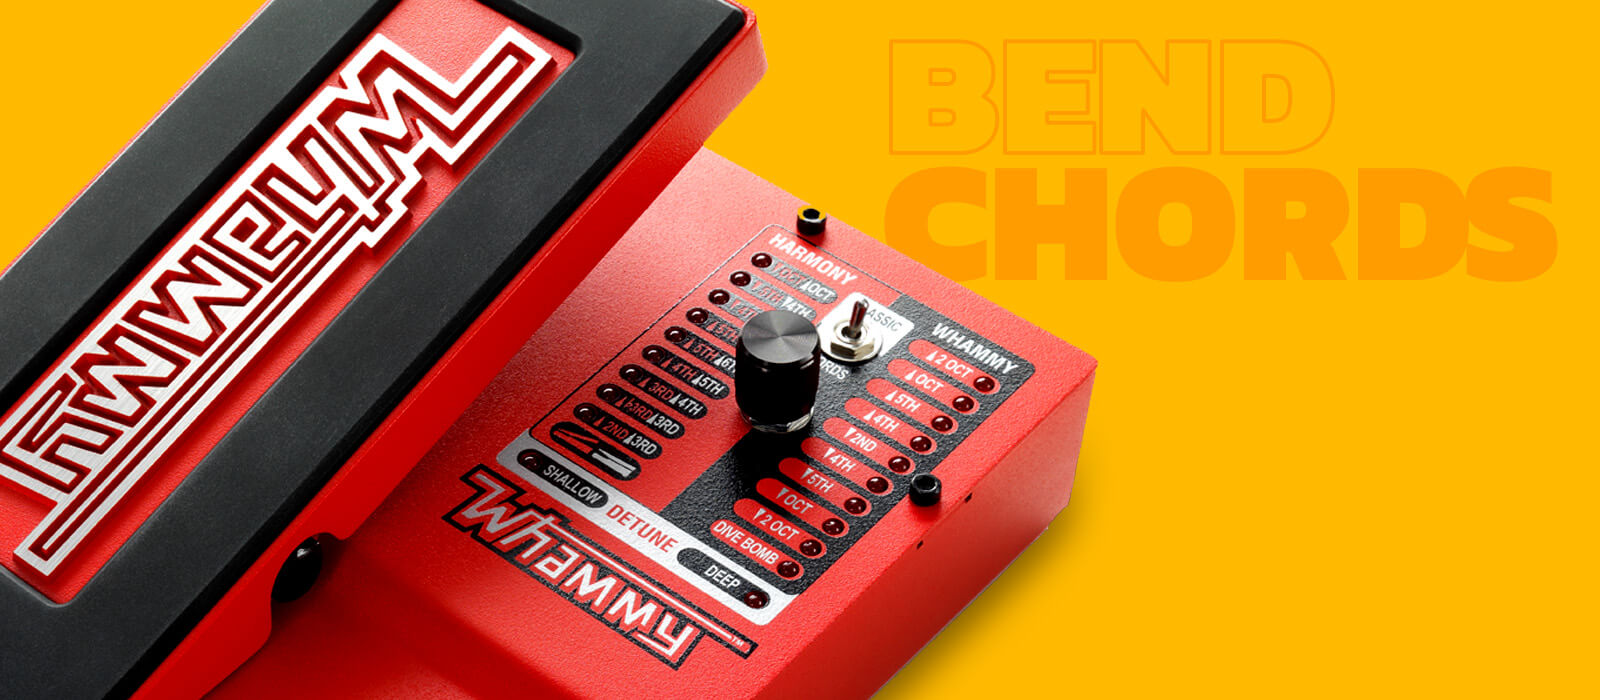 DigiTech Whammy pitch shift effect guitar pedal close up in red with yellow graphics background